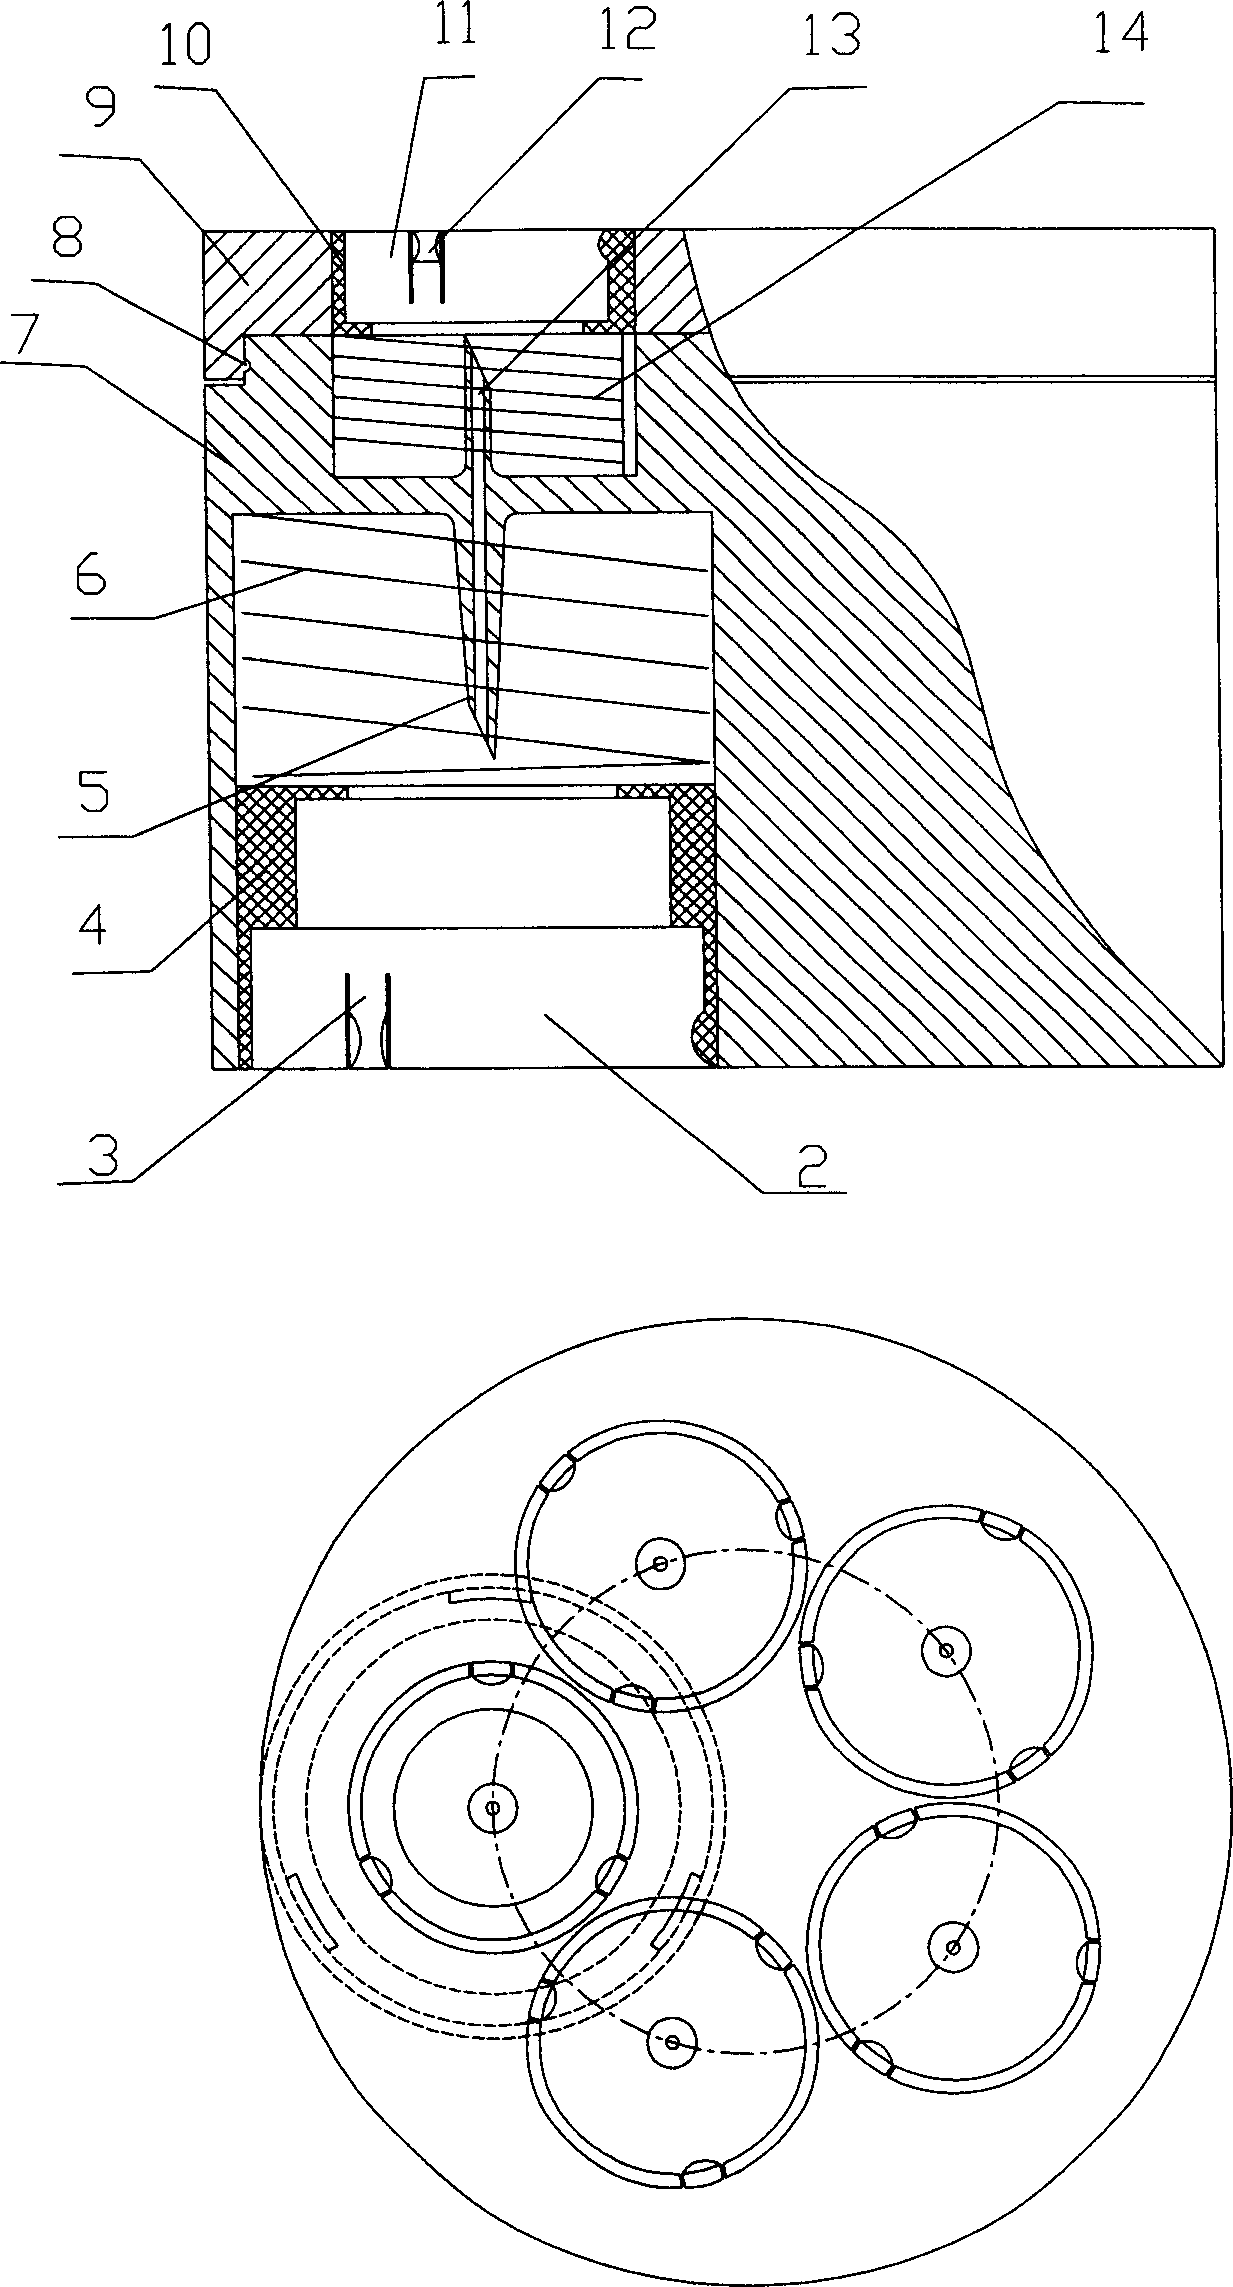 Medicine adding and dispensing device for transfusion